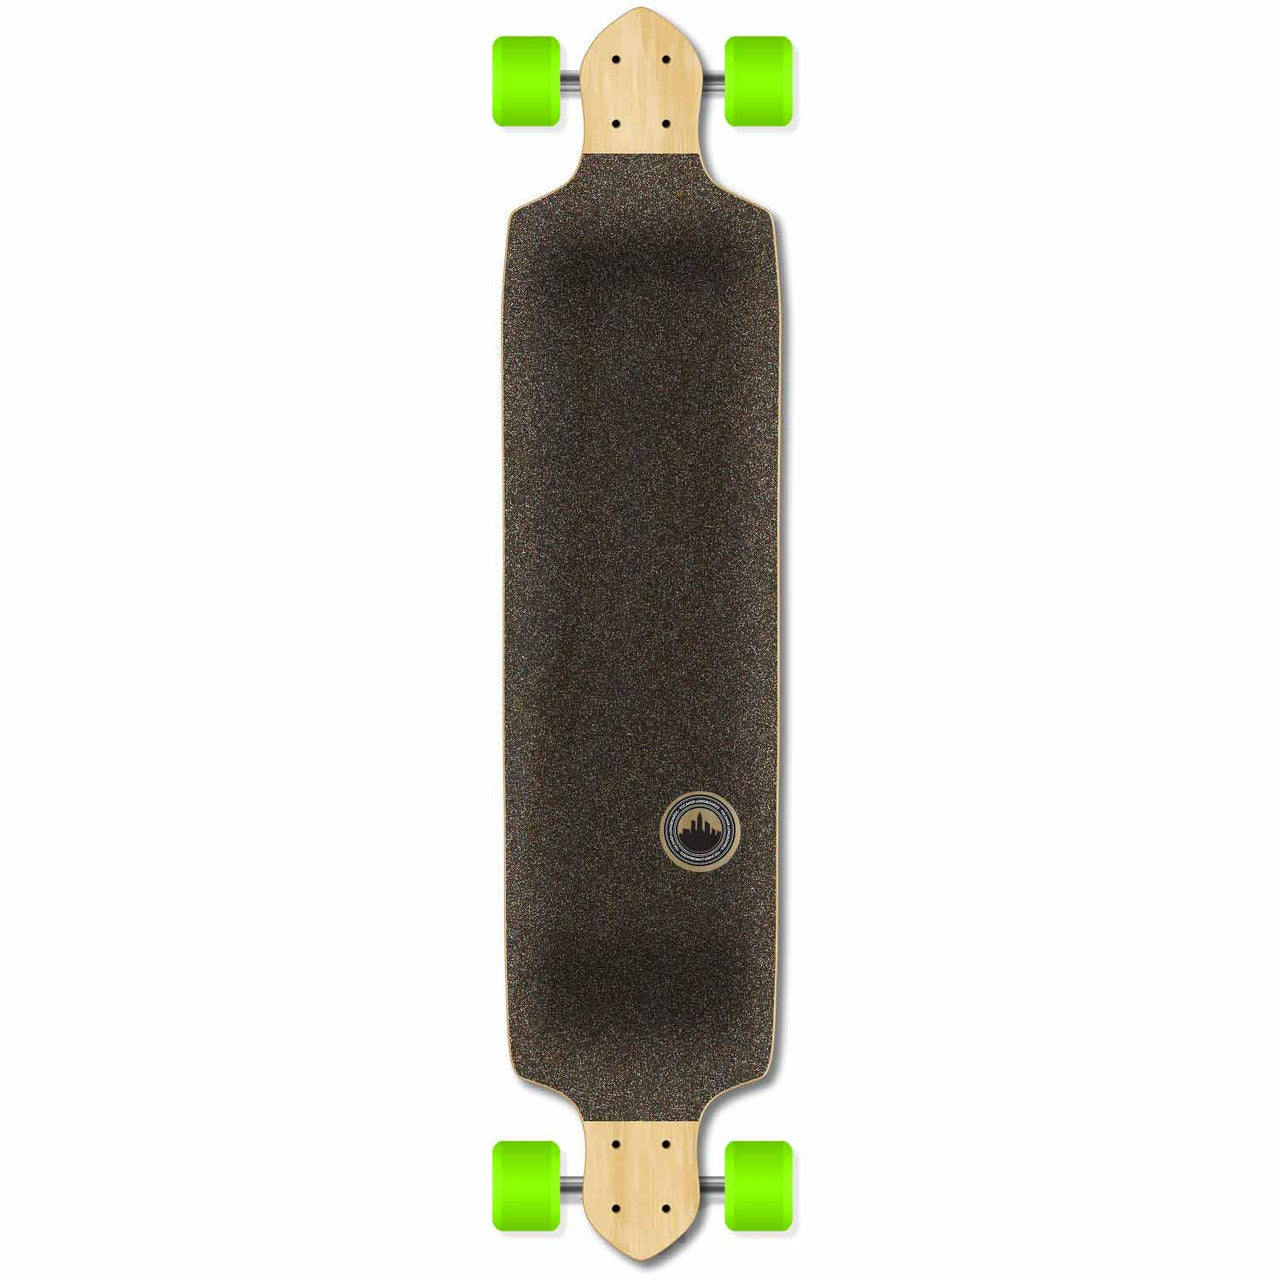 Yocaher Drop Down Longboard Complete - Adventure Natural